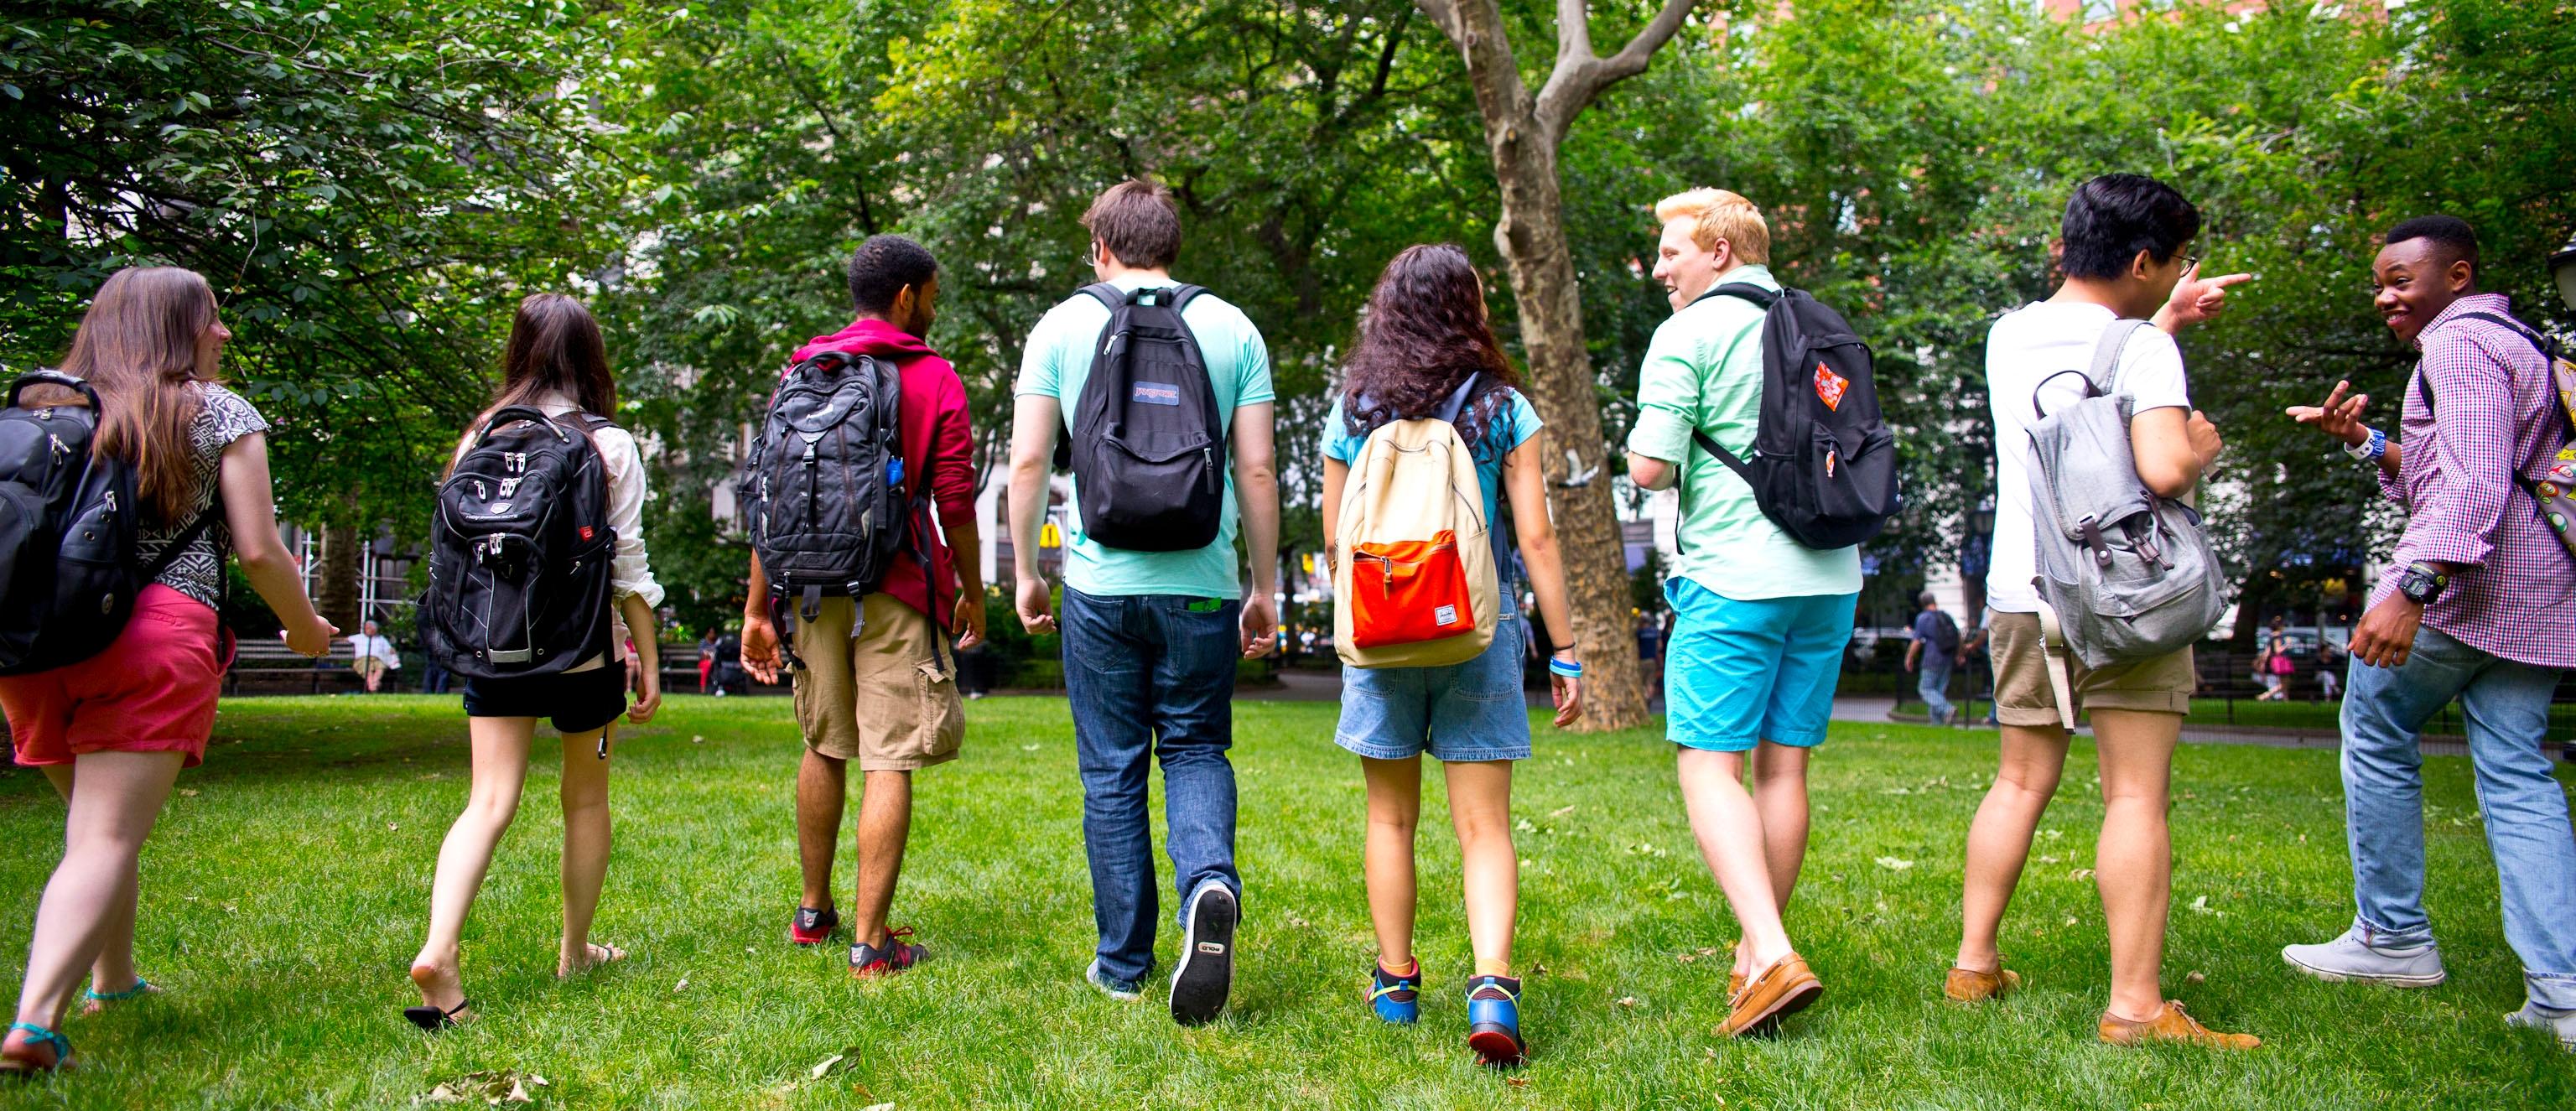 A group of eight people walking across a grassy tree-lined area with their backs to the camera, talking together, all wearing backpacks of various styles and colors